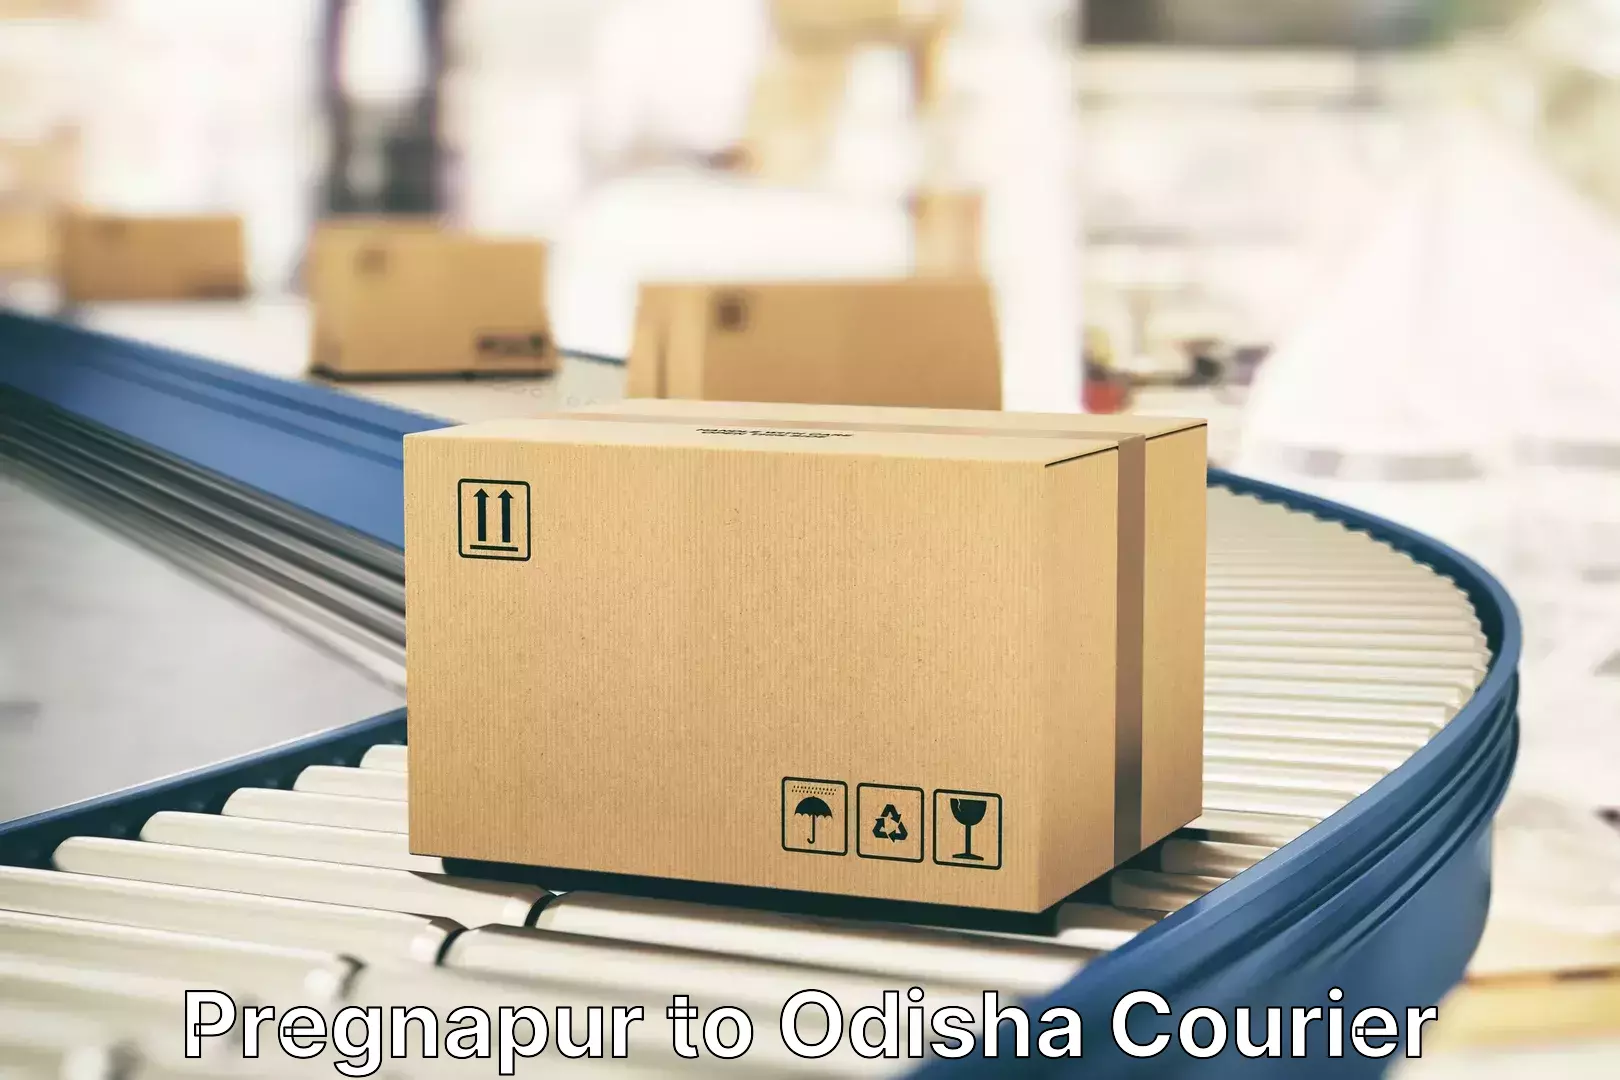 Online luggage shipping booking in Pregnapur to Odisha